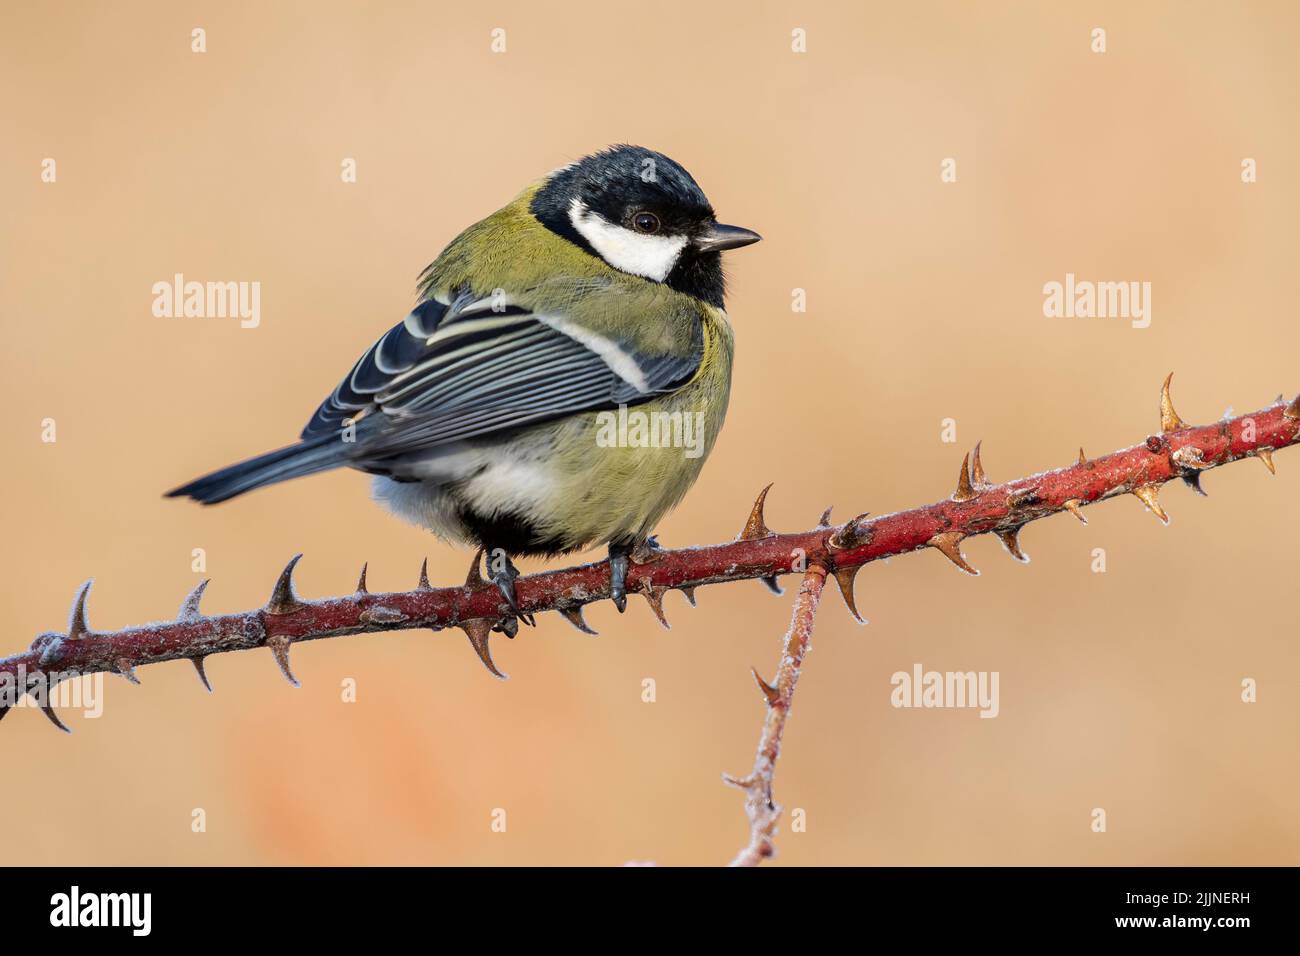 Great Tit, Parus major, perched on a branch with a clear uniform background. Leon, Spain Stock Photo